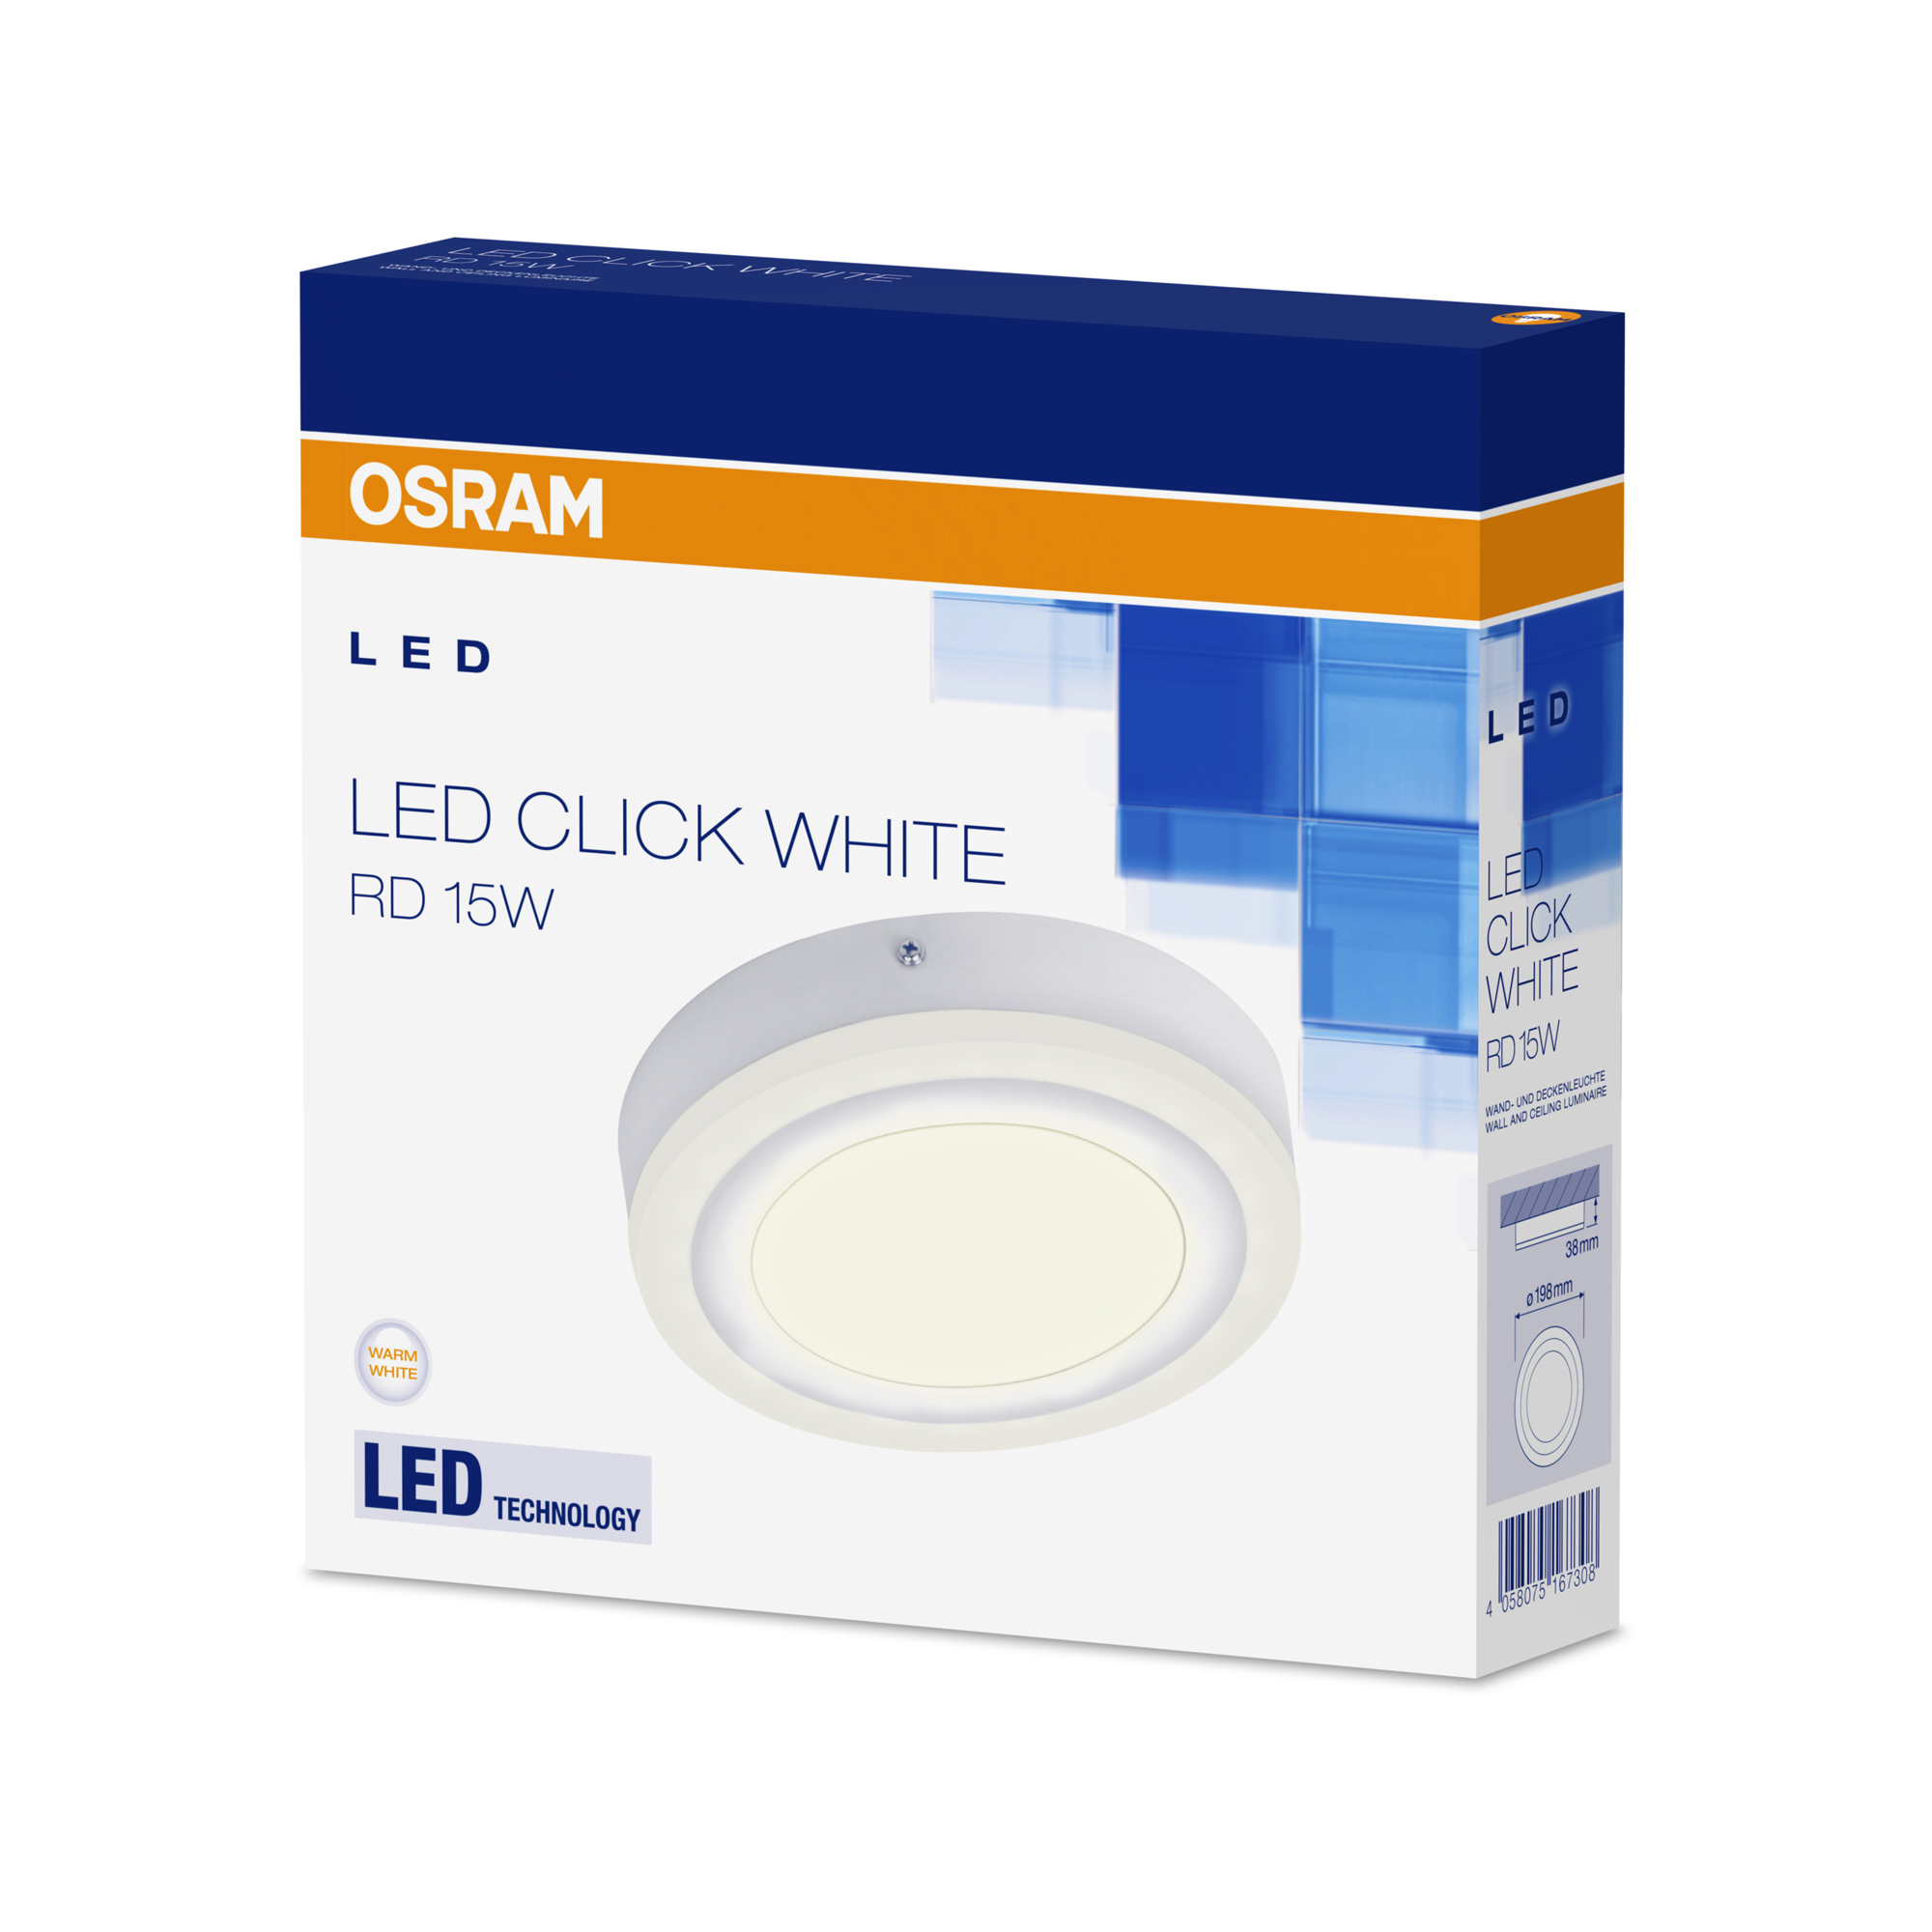 Osram LED CLICK WHITE Round Ceiling and Wall Luminaire 20cm 15W 750lm 3000K CRI80